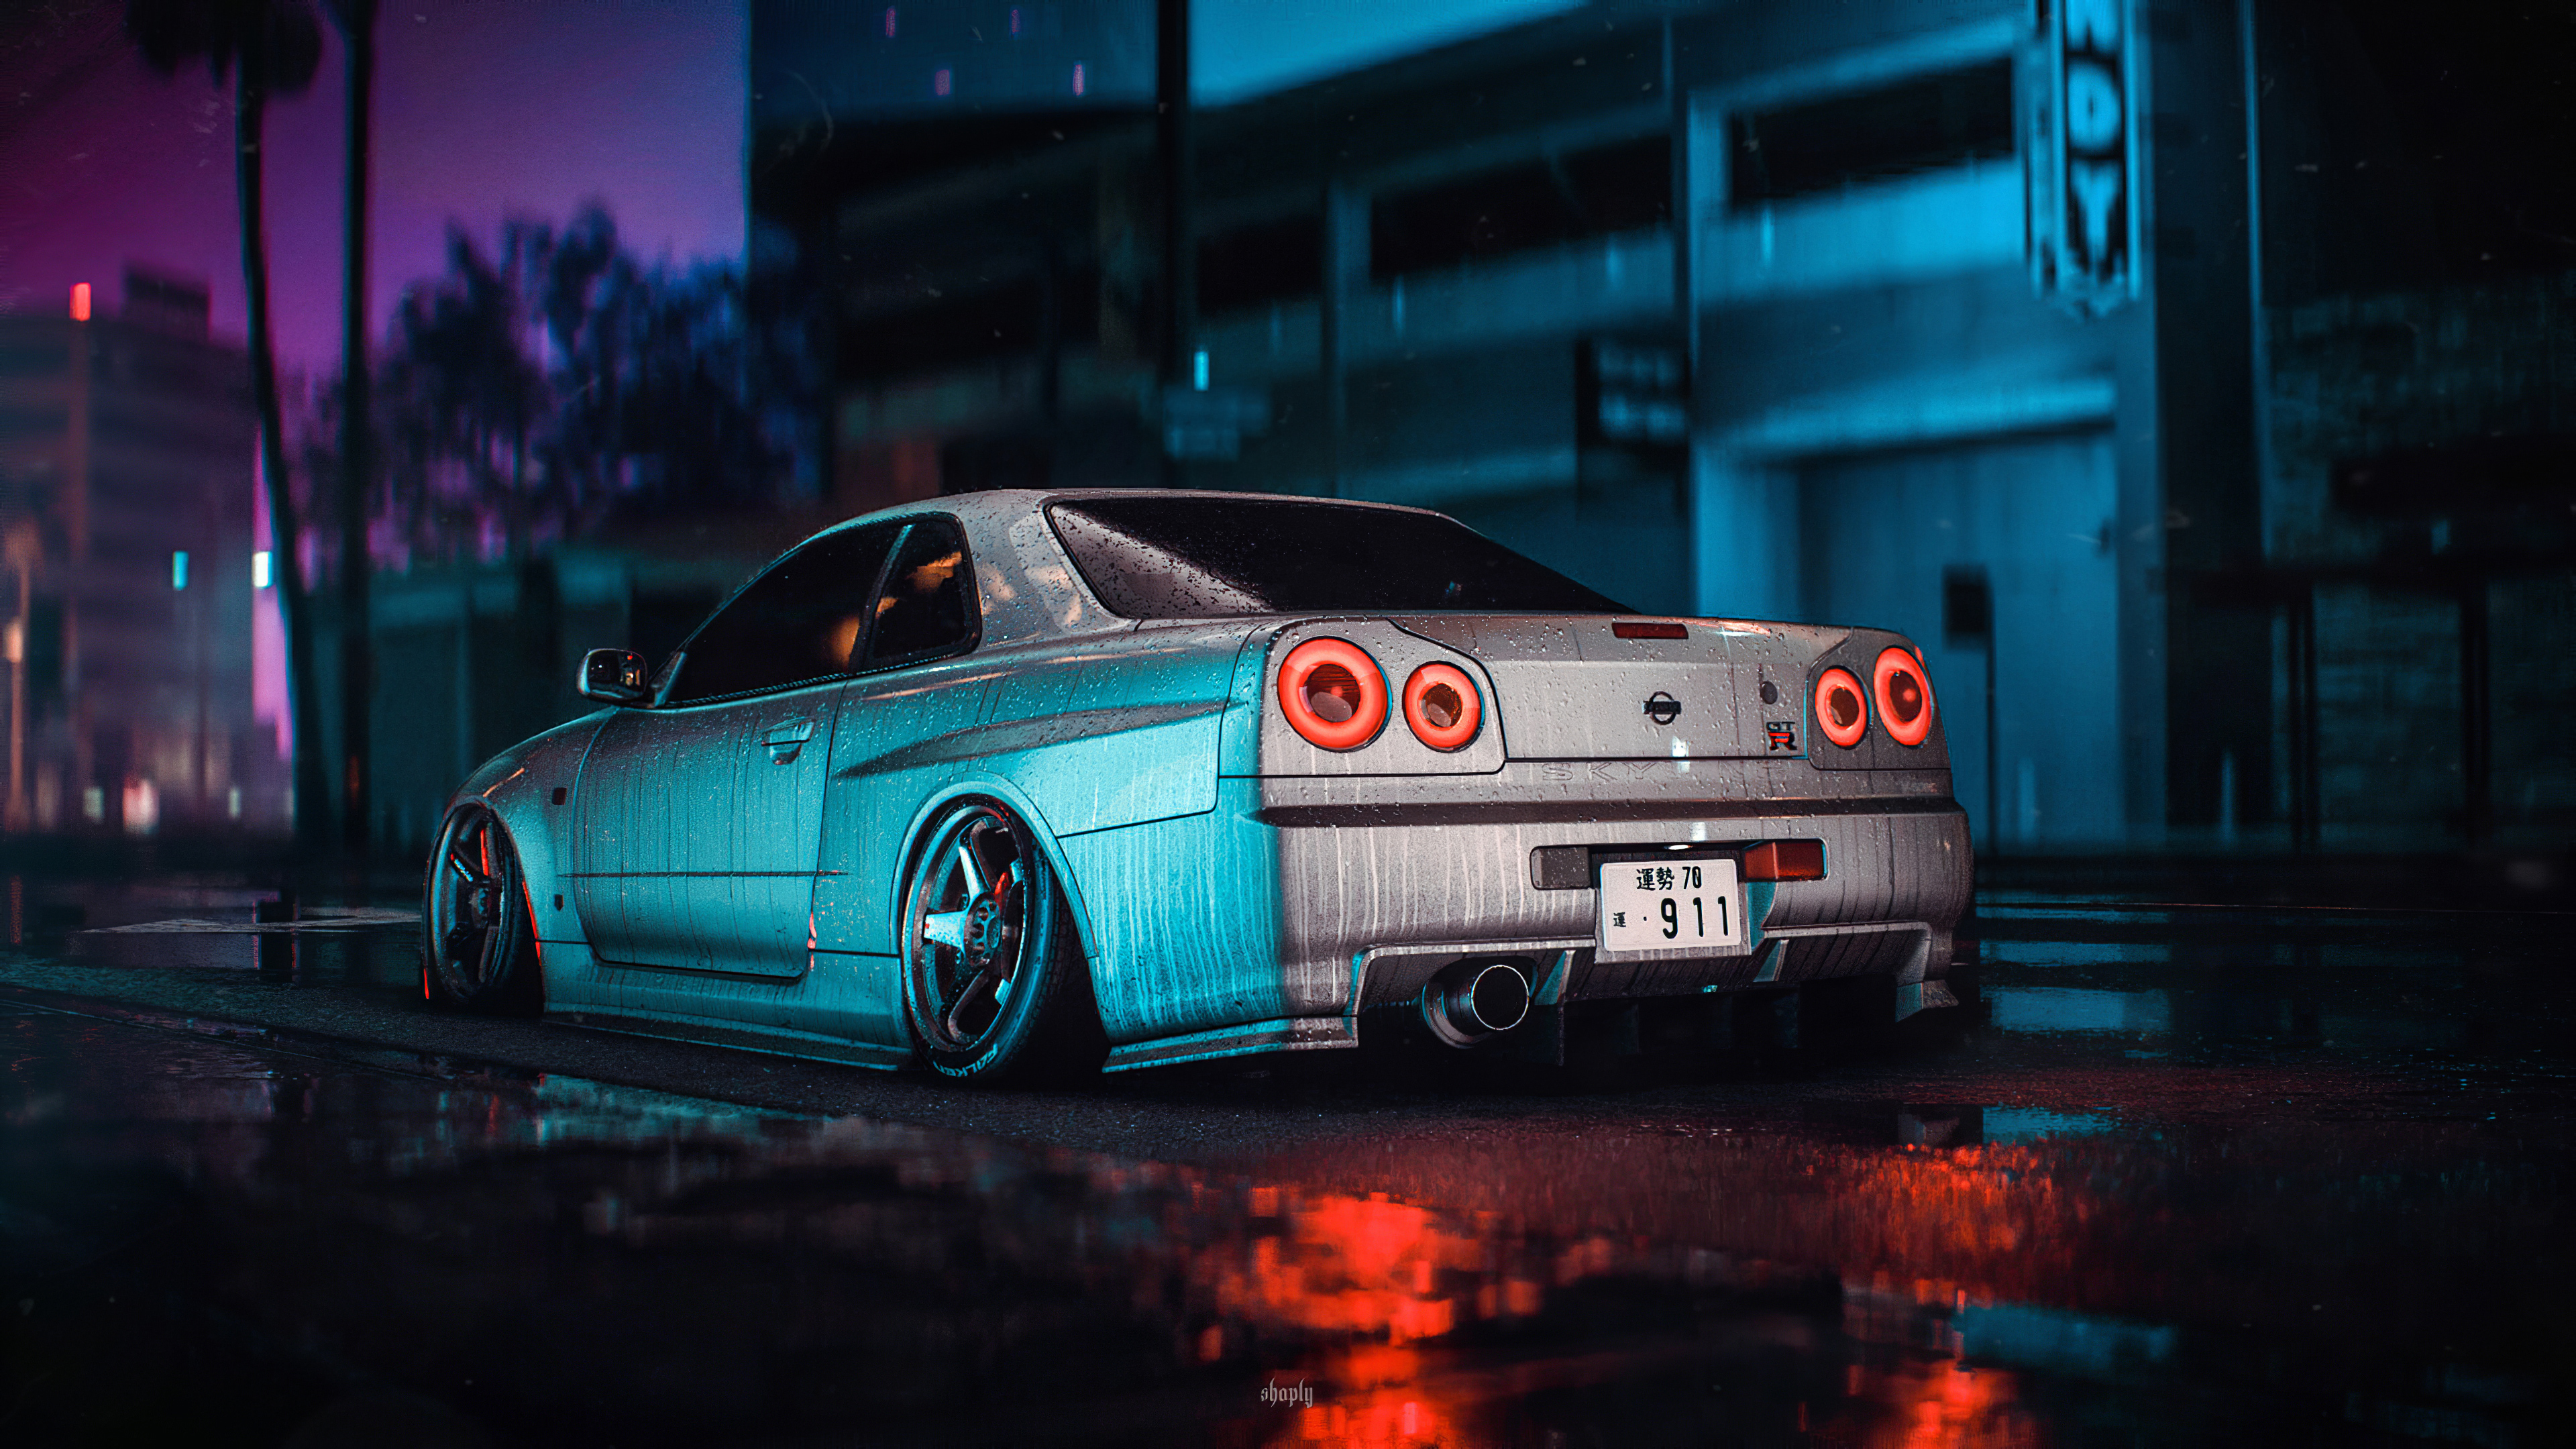 Nissan Skyline Gt R R34 Sports Car Digital Art Need For Speed Matte Finish  Poster Photographic Paper  Movies Gaming Music Sports Quotes   Motivation TV Series posters in India  Buy